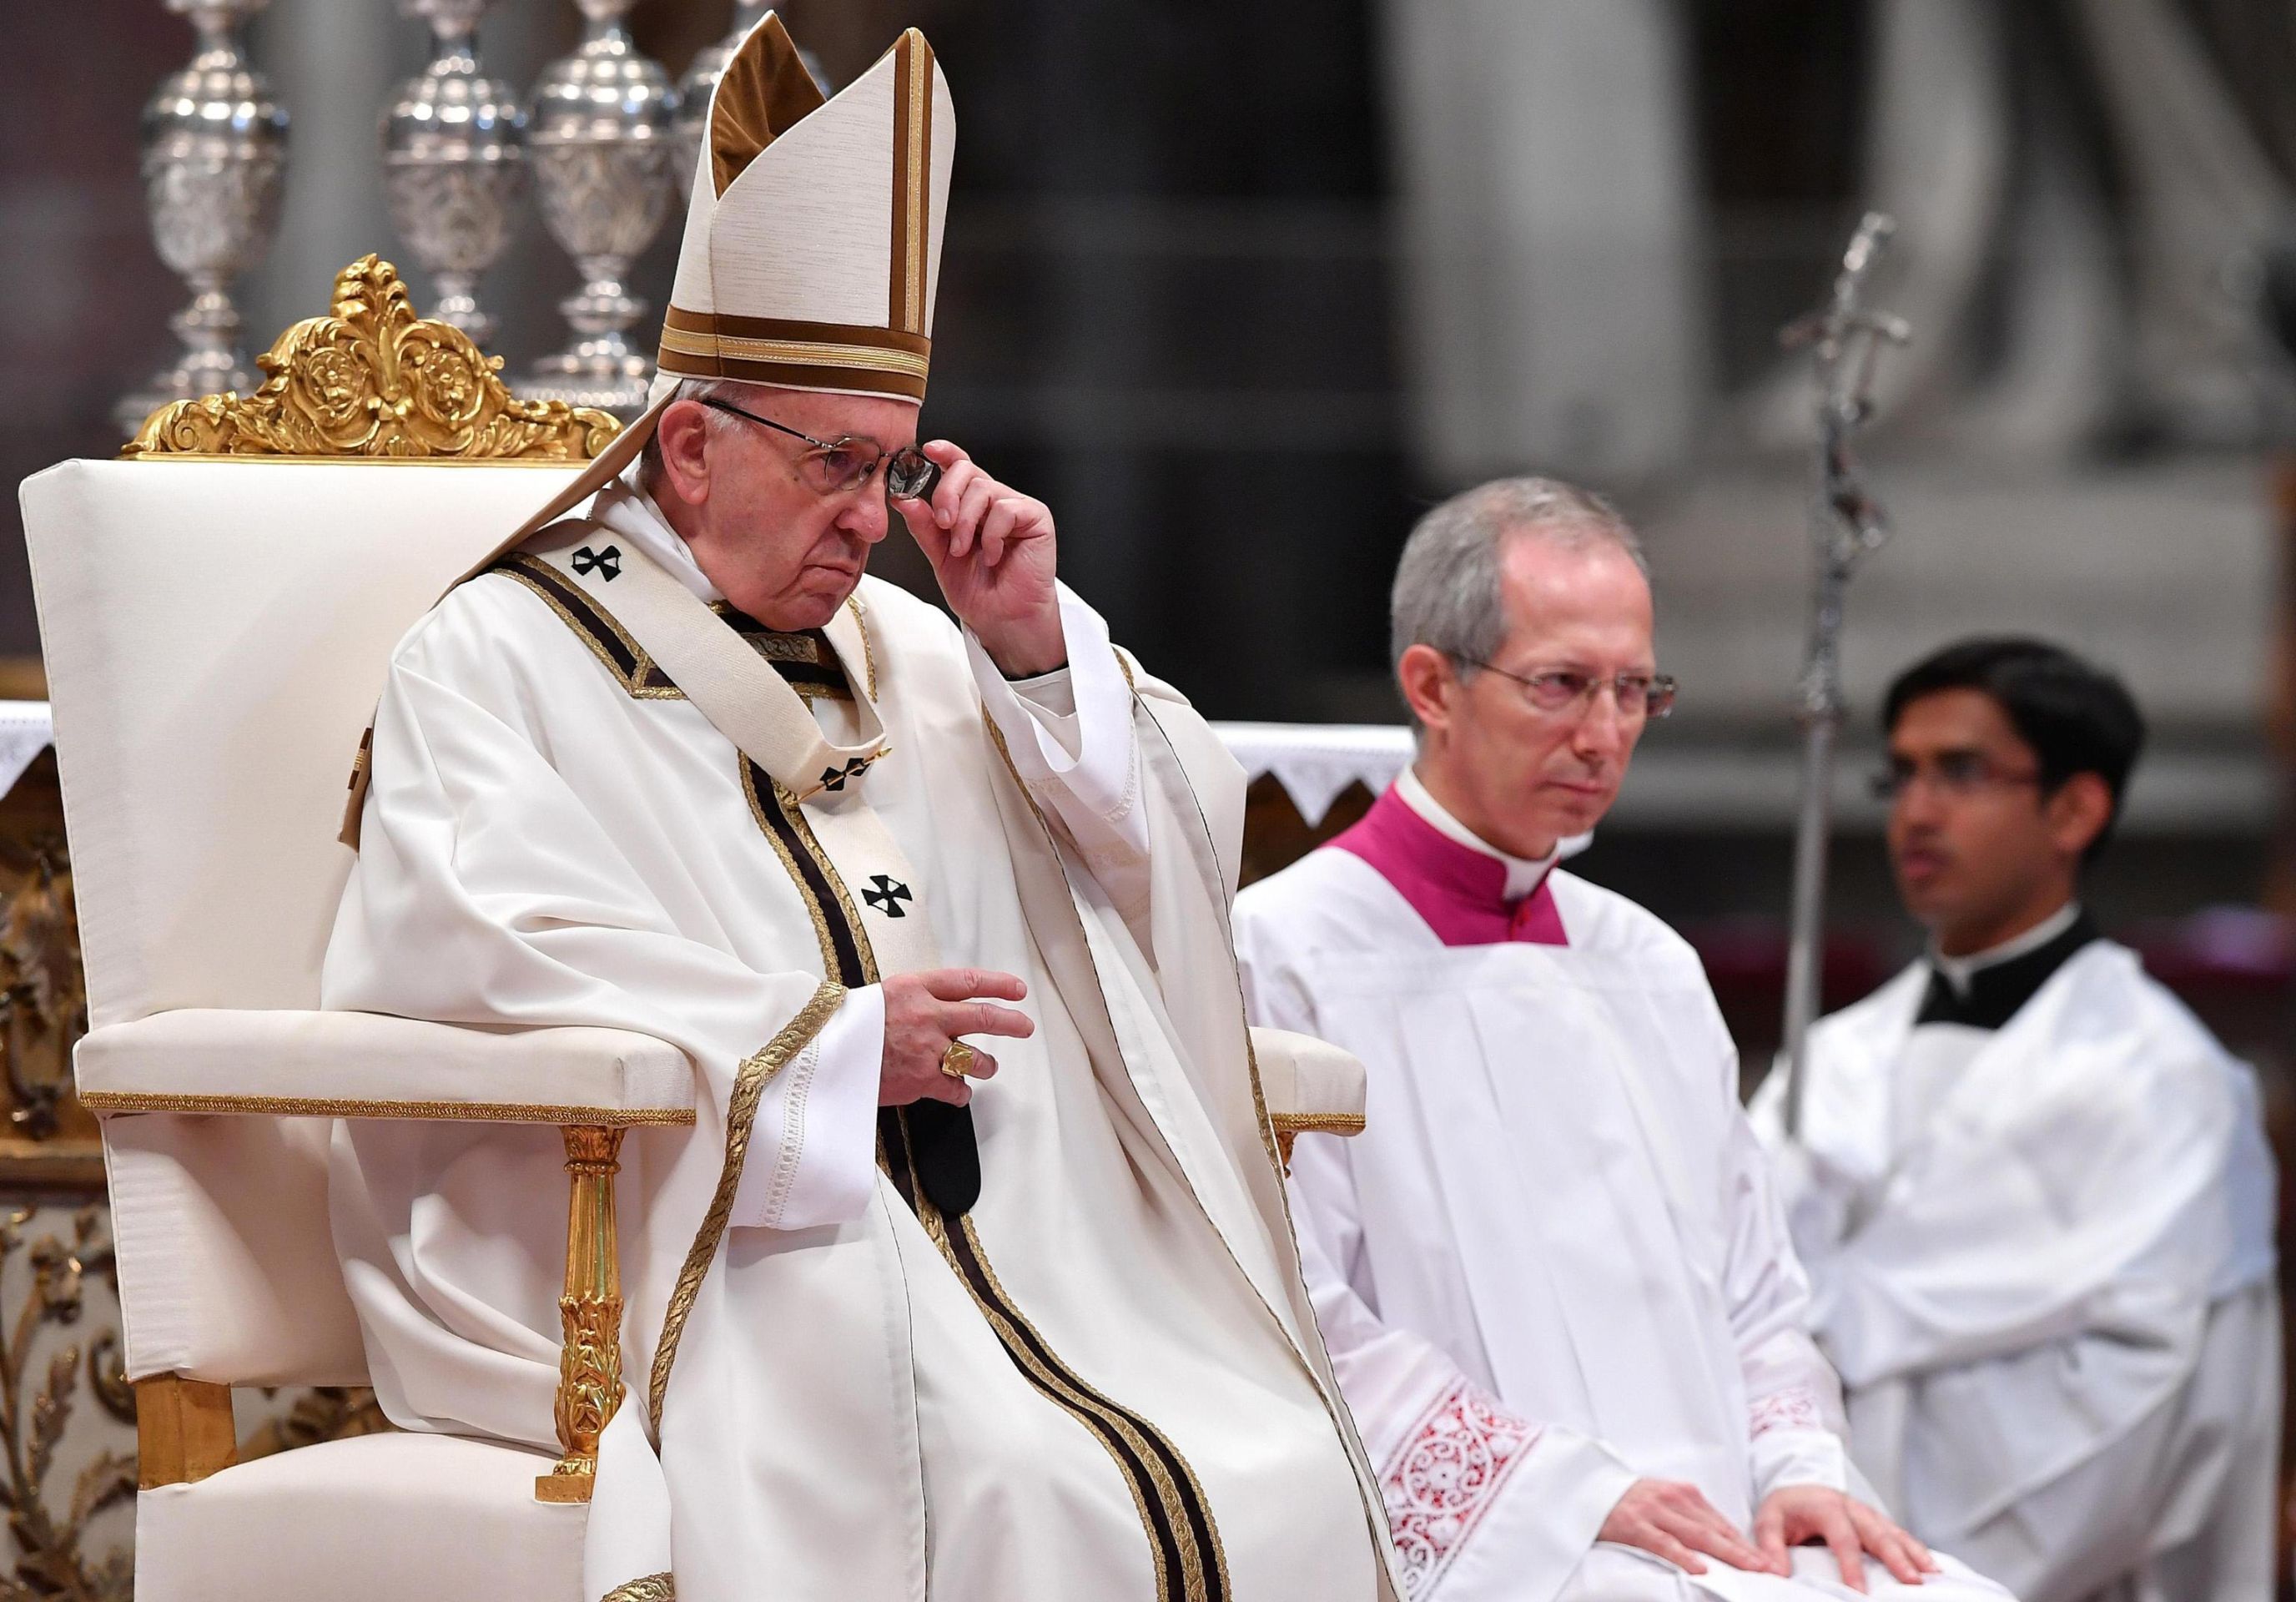 epa05905593 Pope Francis (L) leads the Chrism Mass at the Saint Peter's Basilica in the Vatican City, on Maundy Thursday, 13 April 2017. During the mass the Pope blesses Chrism oil which is used for the religious sacraments during this year. The Chrism Mass is part of the Catholic church's rites during the Holy Week. Others are not identified.  EPA/ETTORE FERRARI